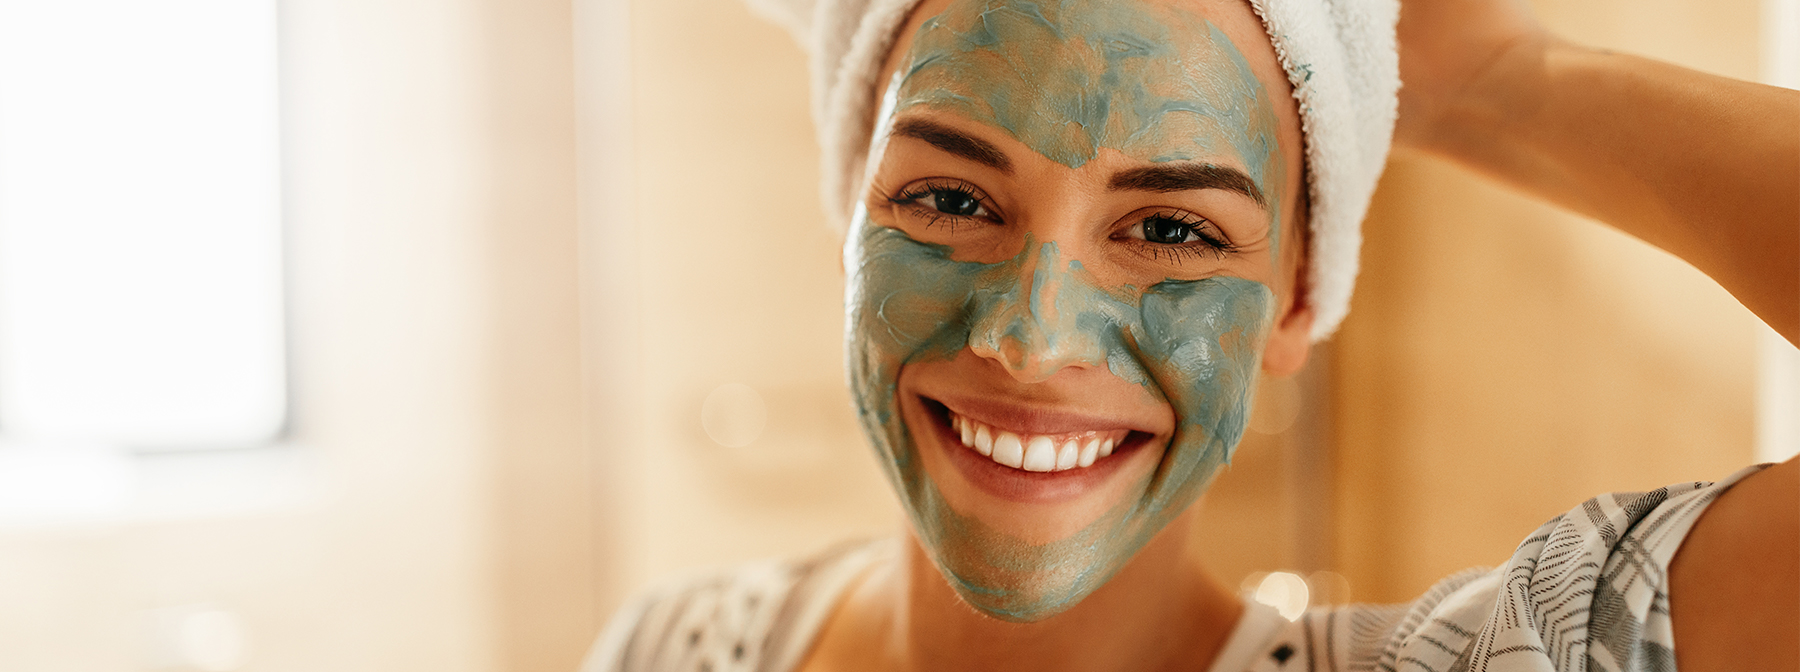 Skin Care Masks and Peels for a Healthy Complexion